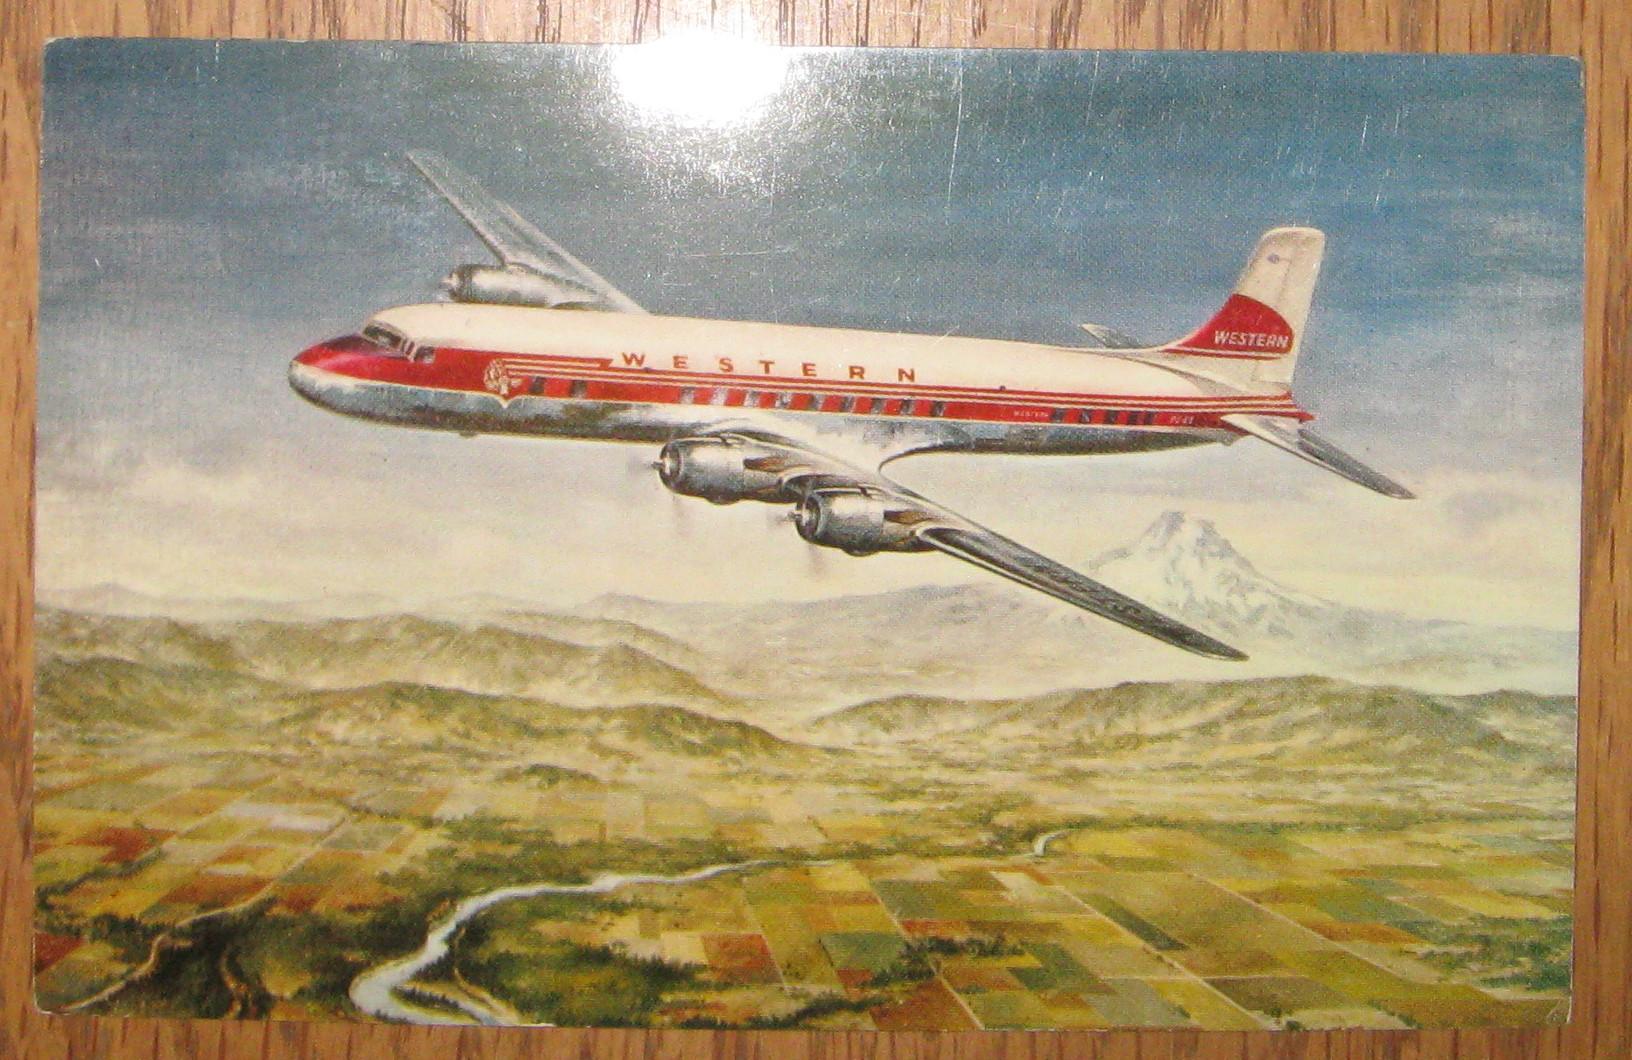 Queen of the Western Airlines fleet is the DC-6B